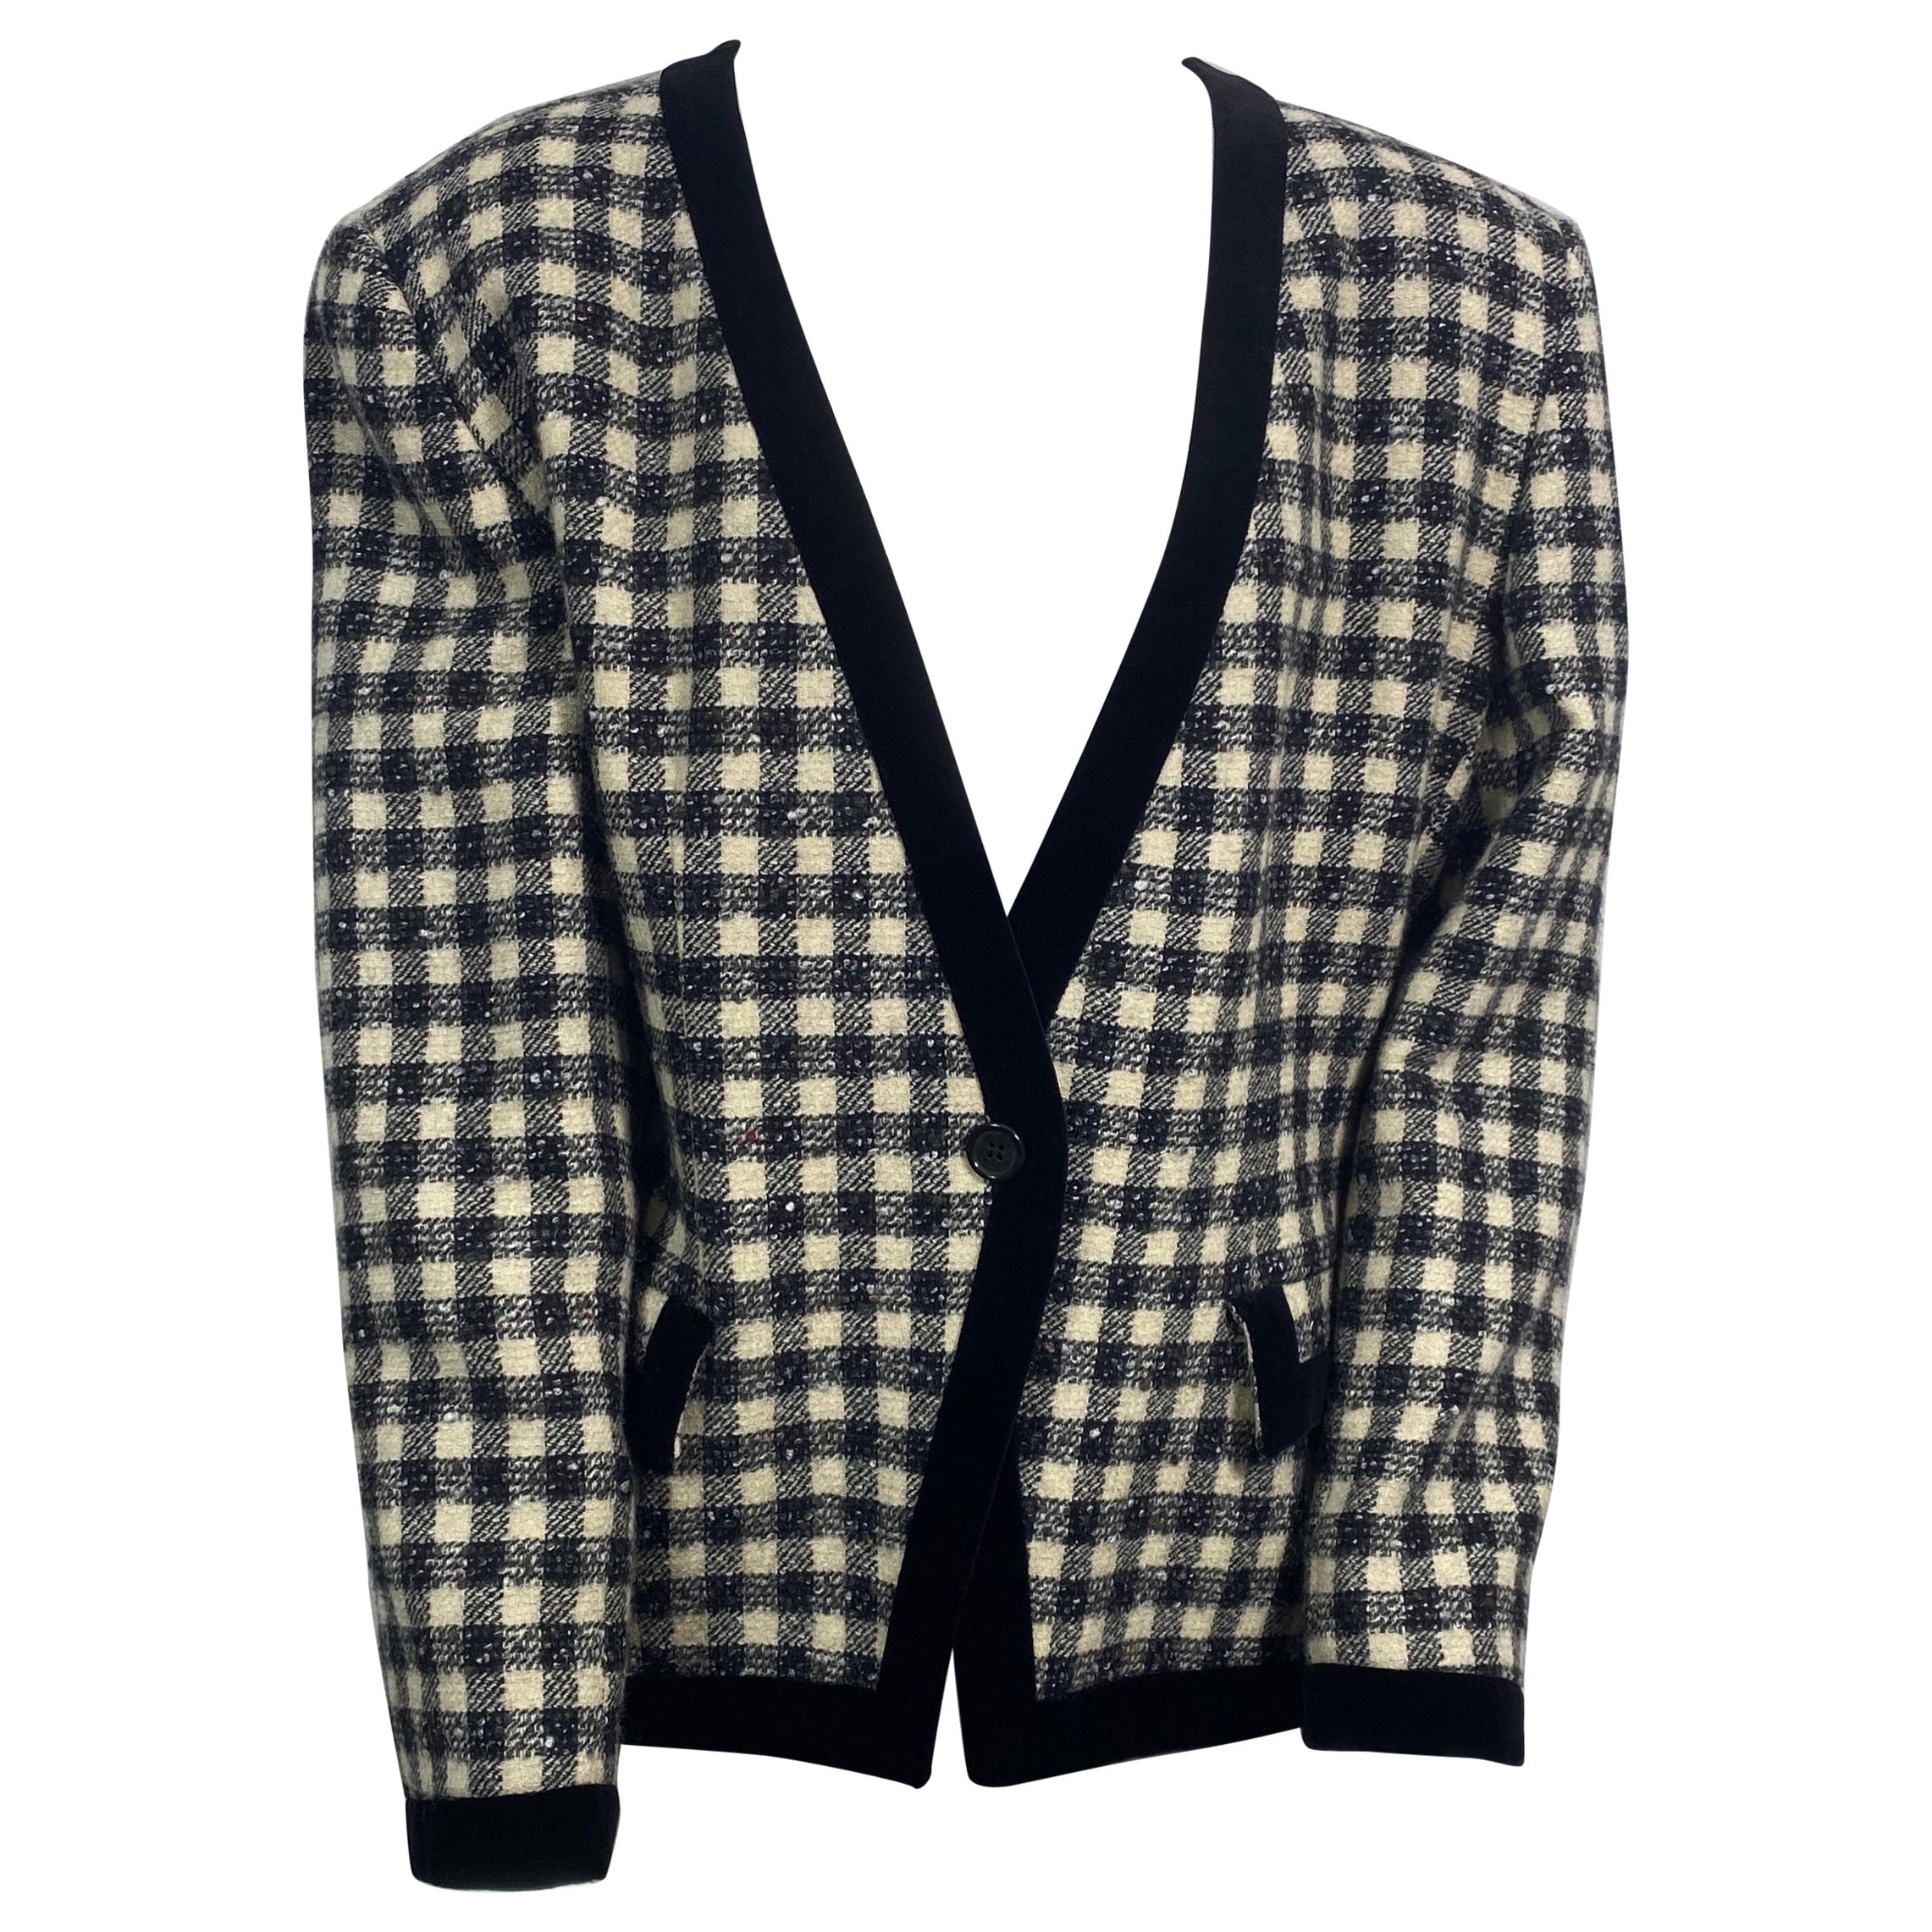 Giorgio Armani 1990’s Black and Ivory Tweed and Velvet Checkered Jacket -Size 46 For Sale